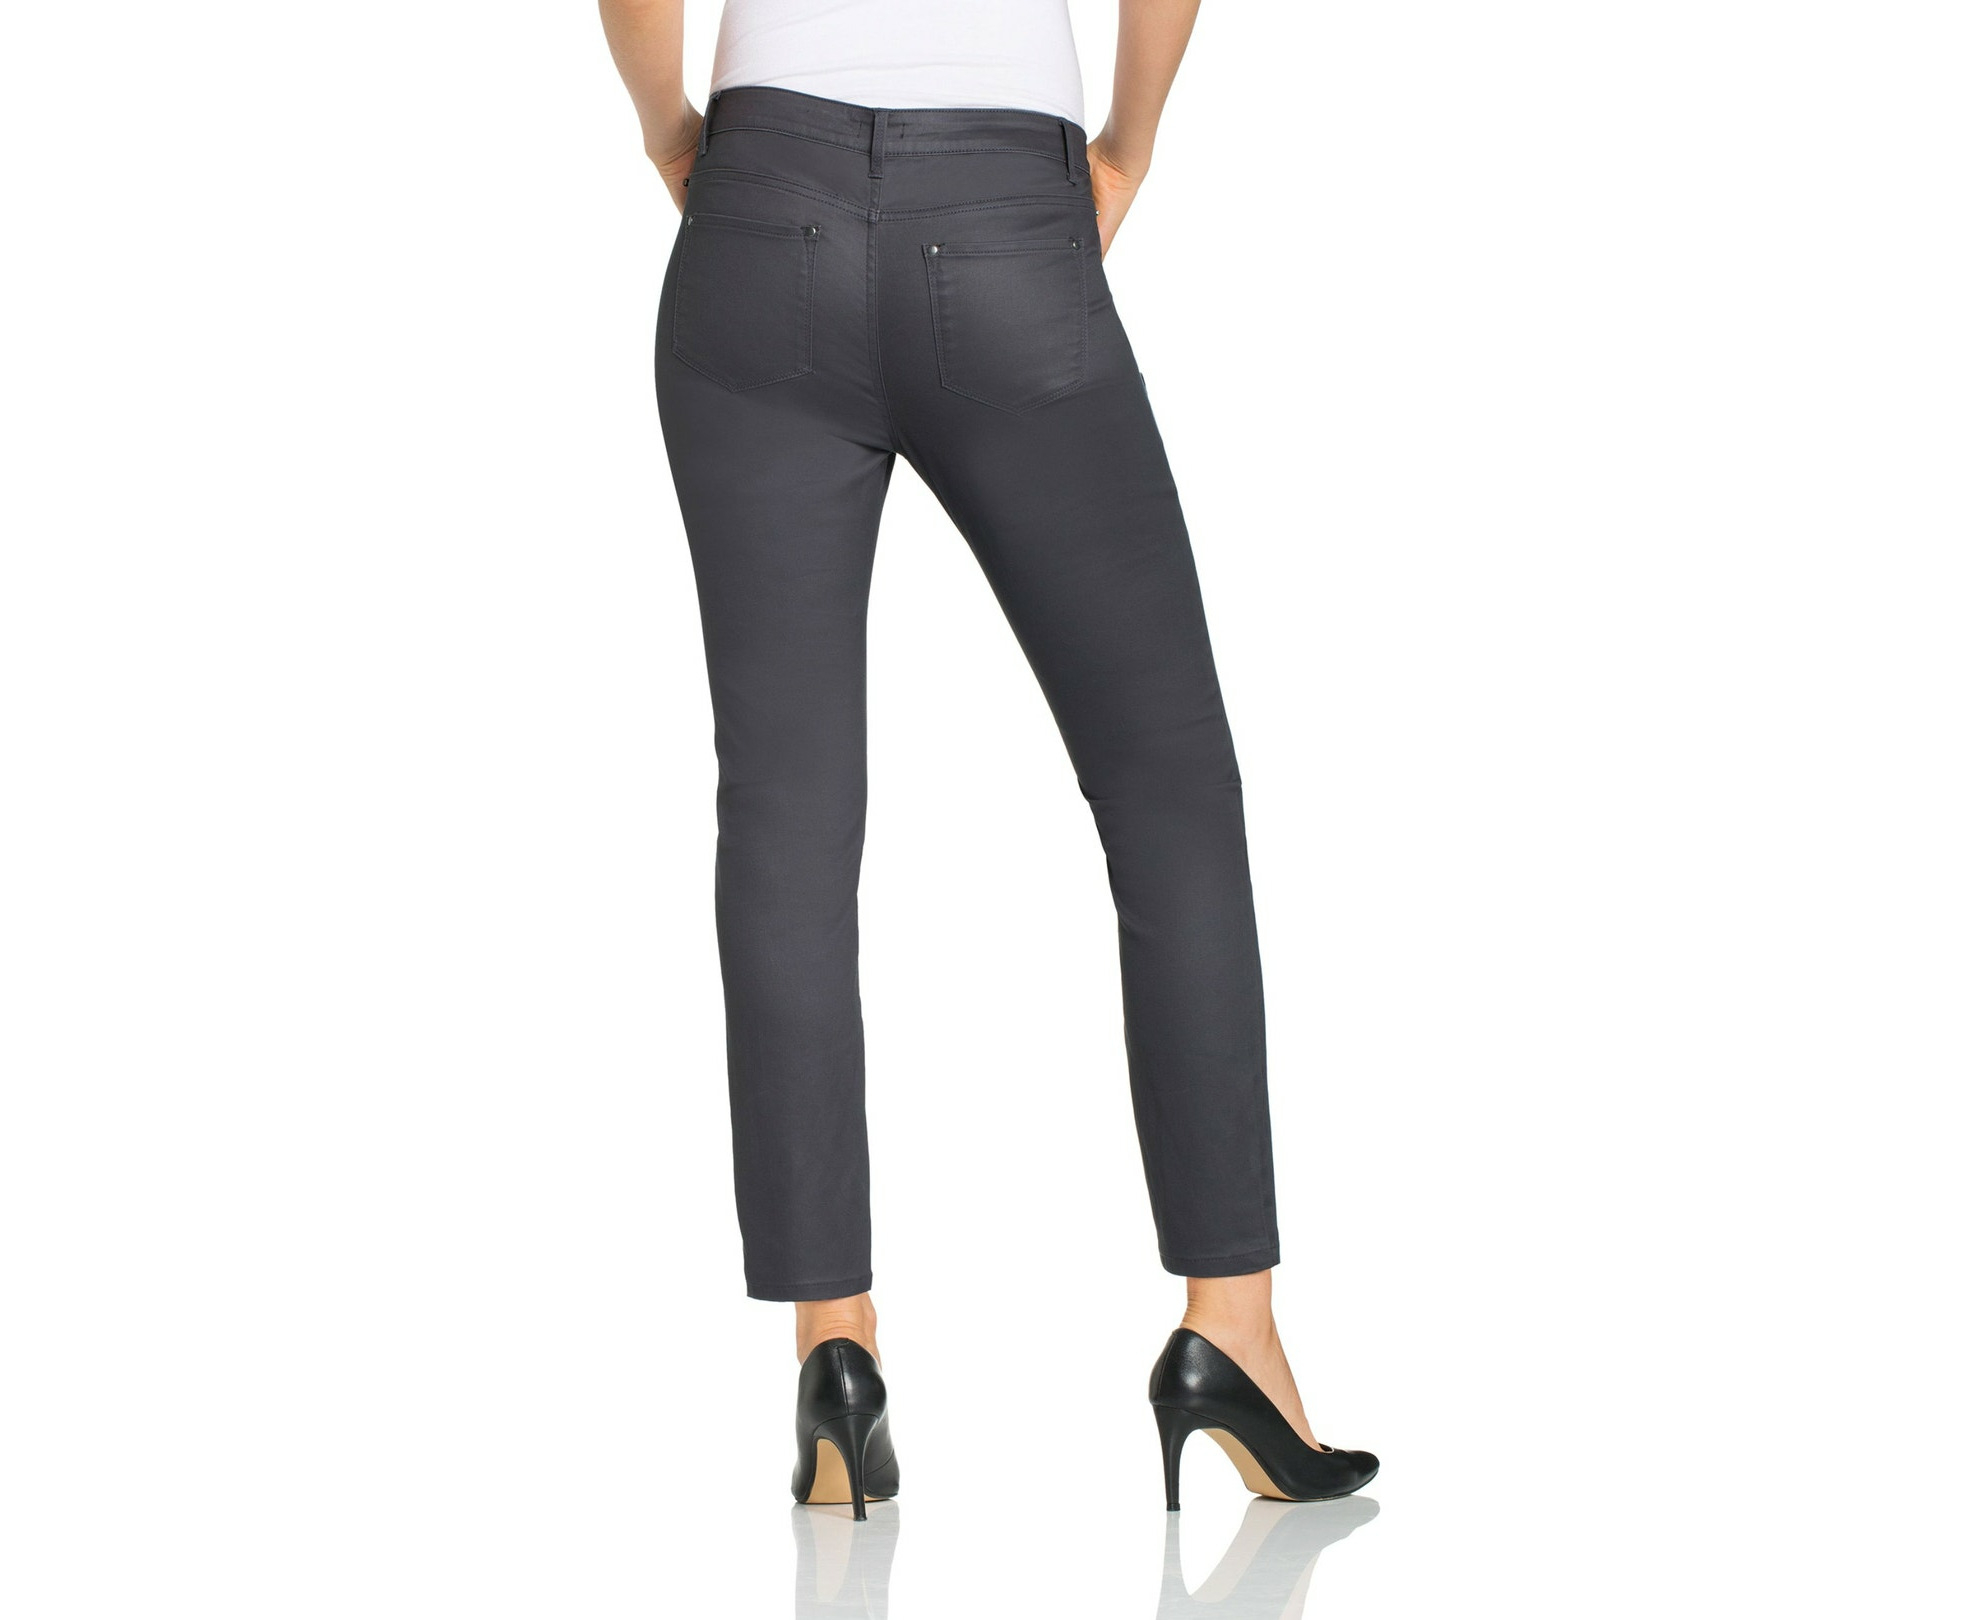 Emerge - Womens Jeans - Black Ankle Length - Solid Cotton Pants - Casual  Fashion - Winter - Elastane - Stud Hem - Slim Trousers - Office Work  Clothes - Black